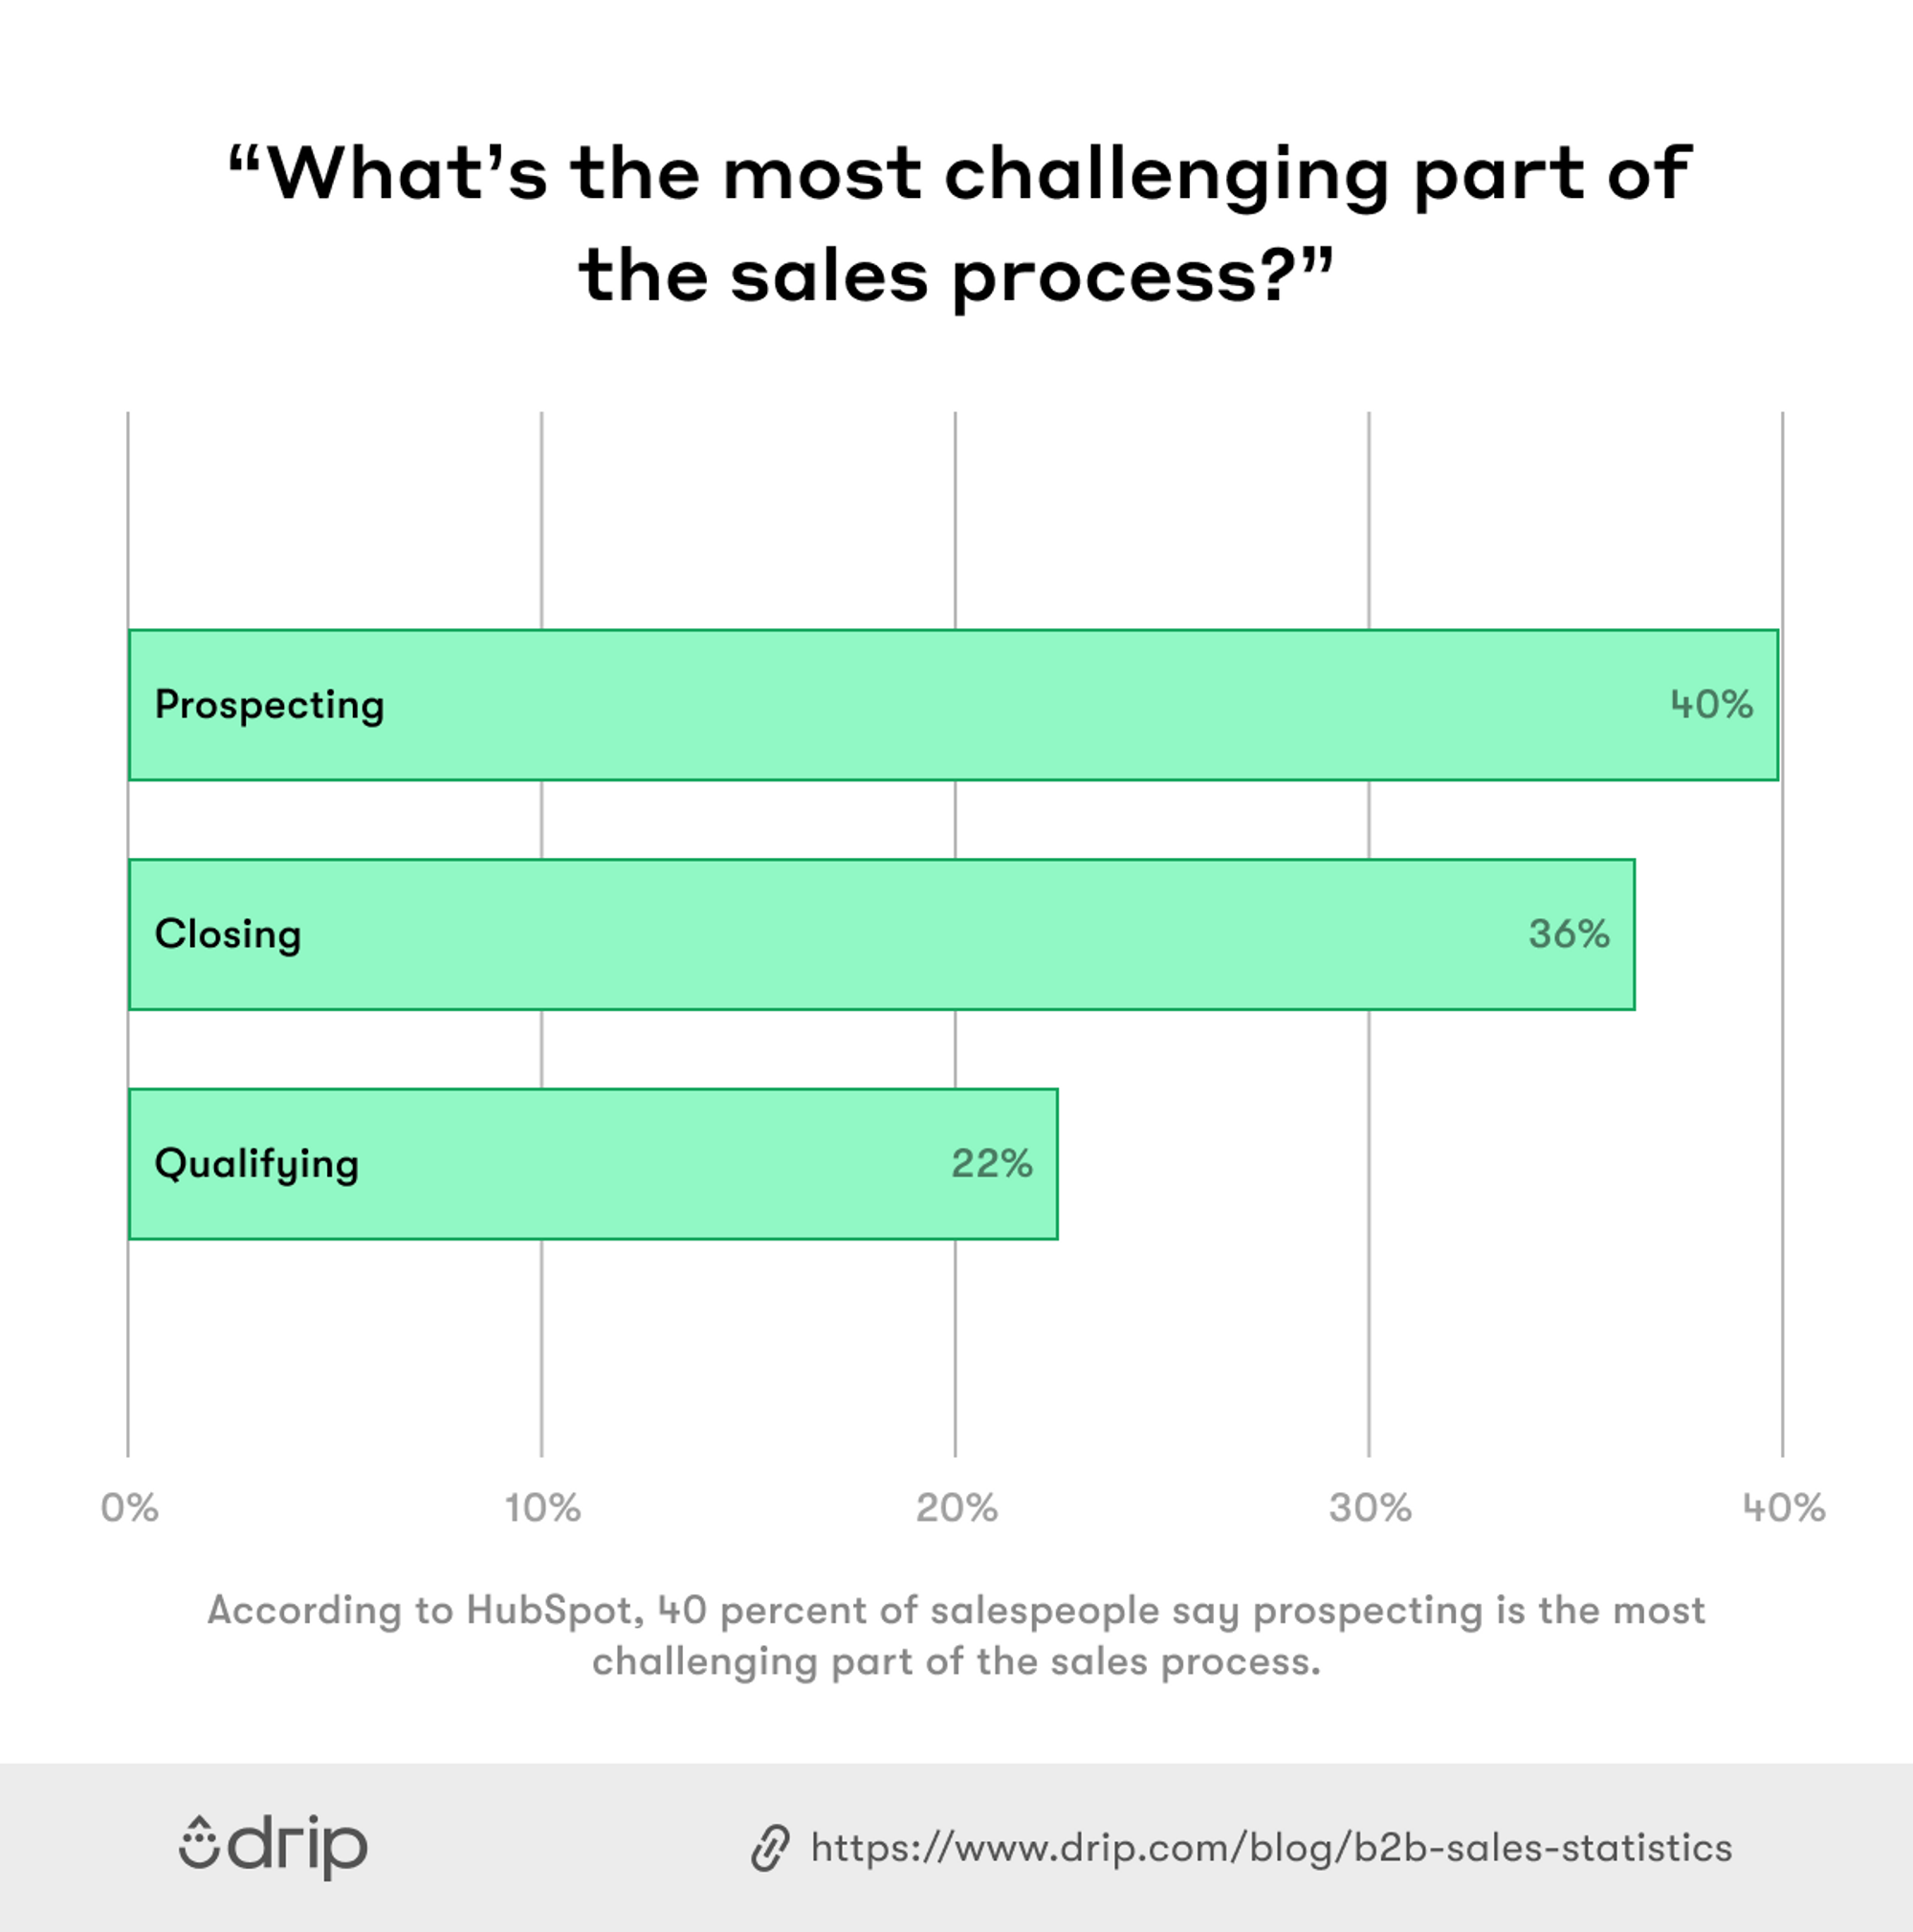 whats_the_most_challenging_part_of_the_sales_process